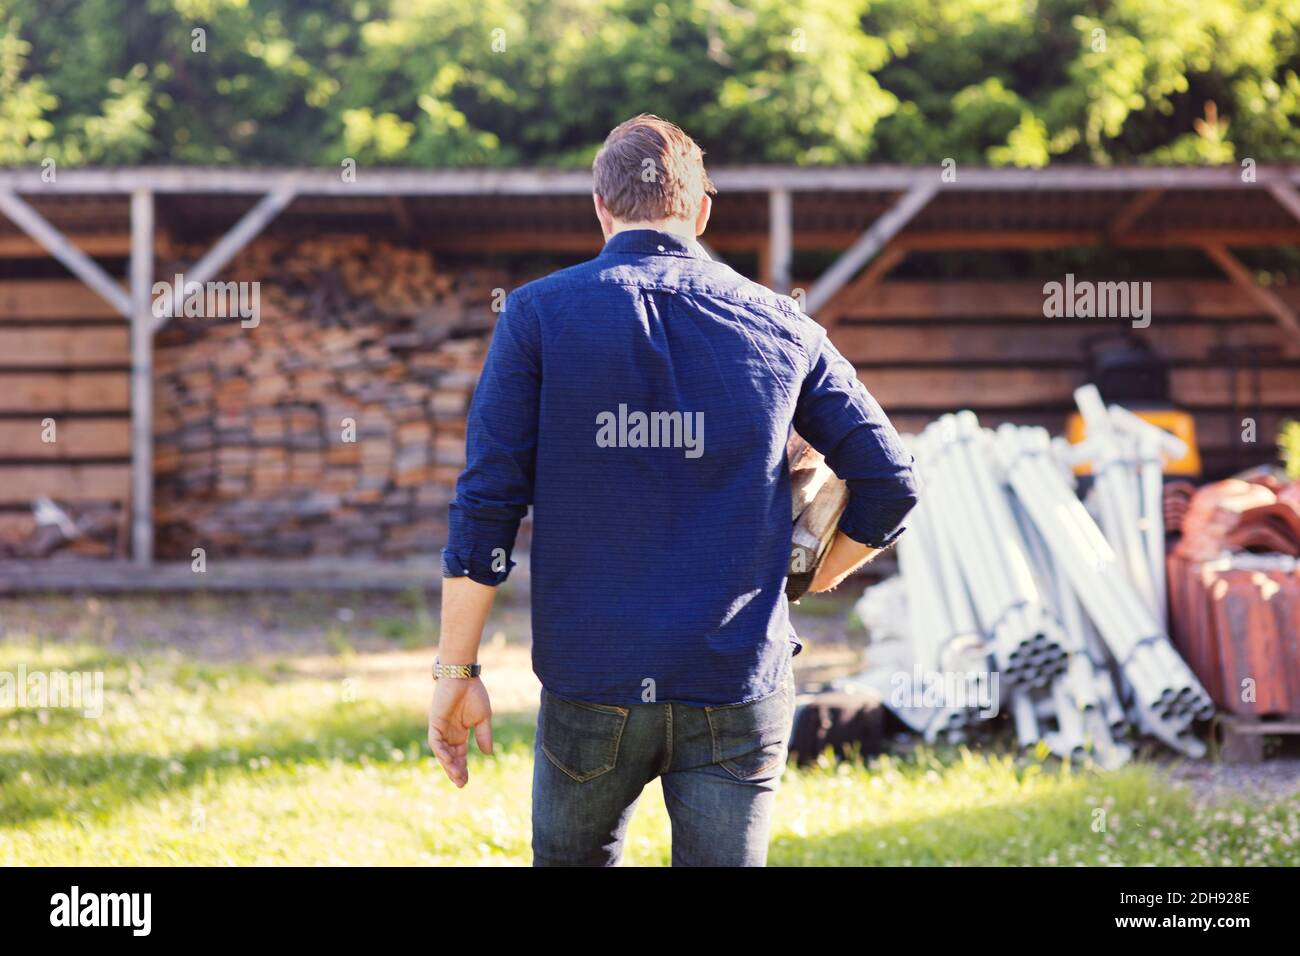 Rear view of man carrying firewood while walking towards shed Stock Photo